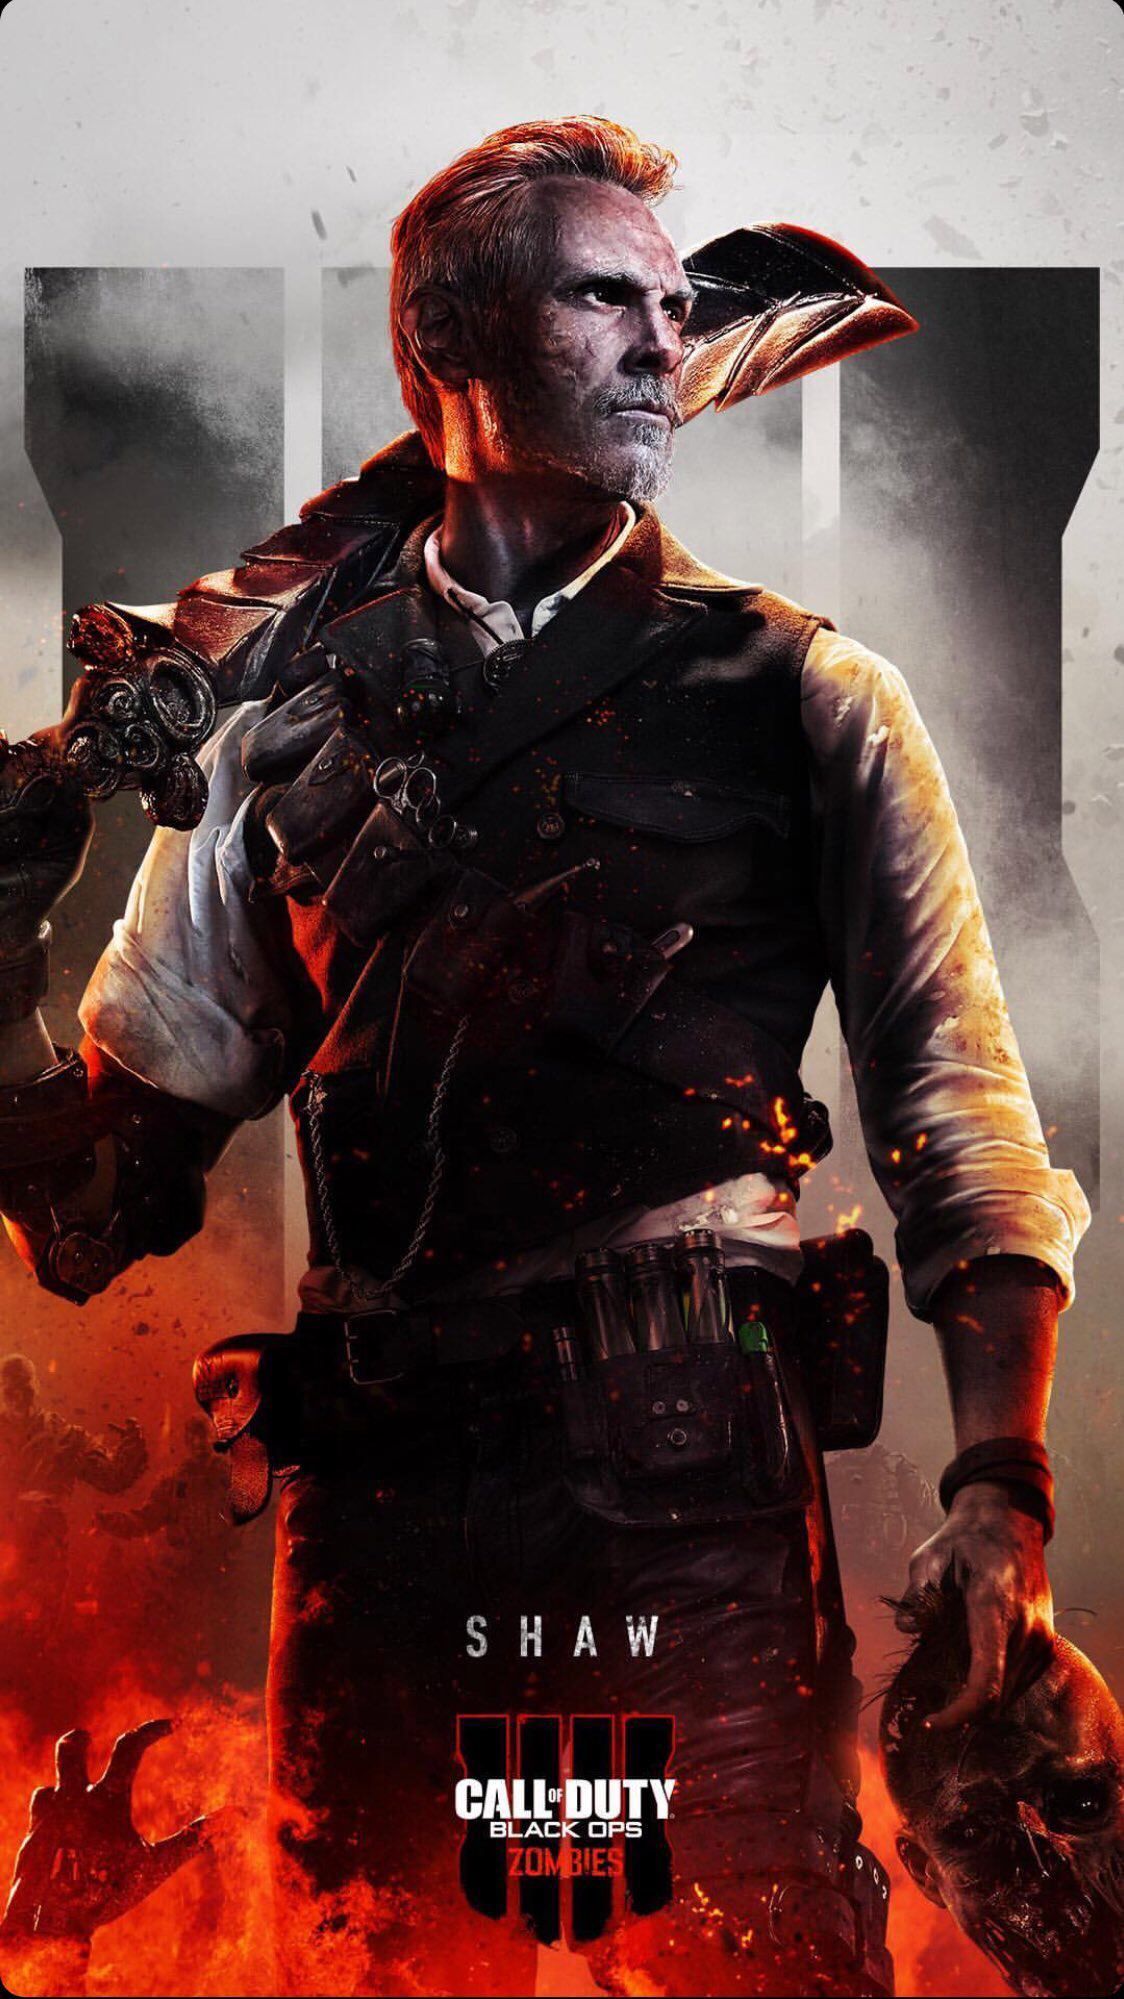 Check Out Black Ops 4 Zombies Phone Wallpaper Jacka1. Zombis, Call of duty, Fotos